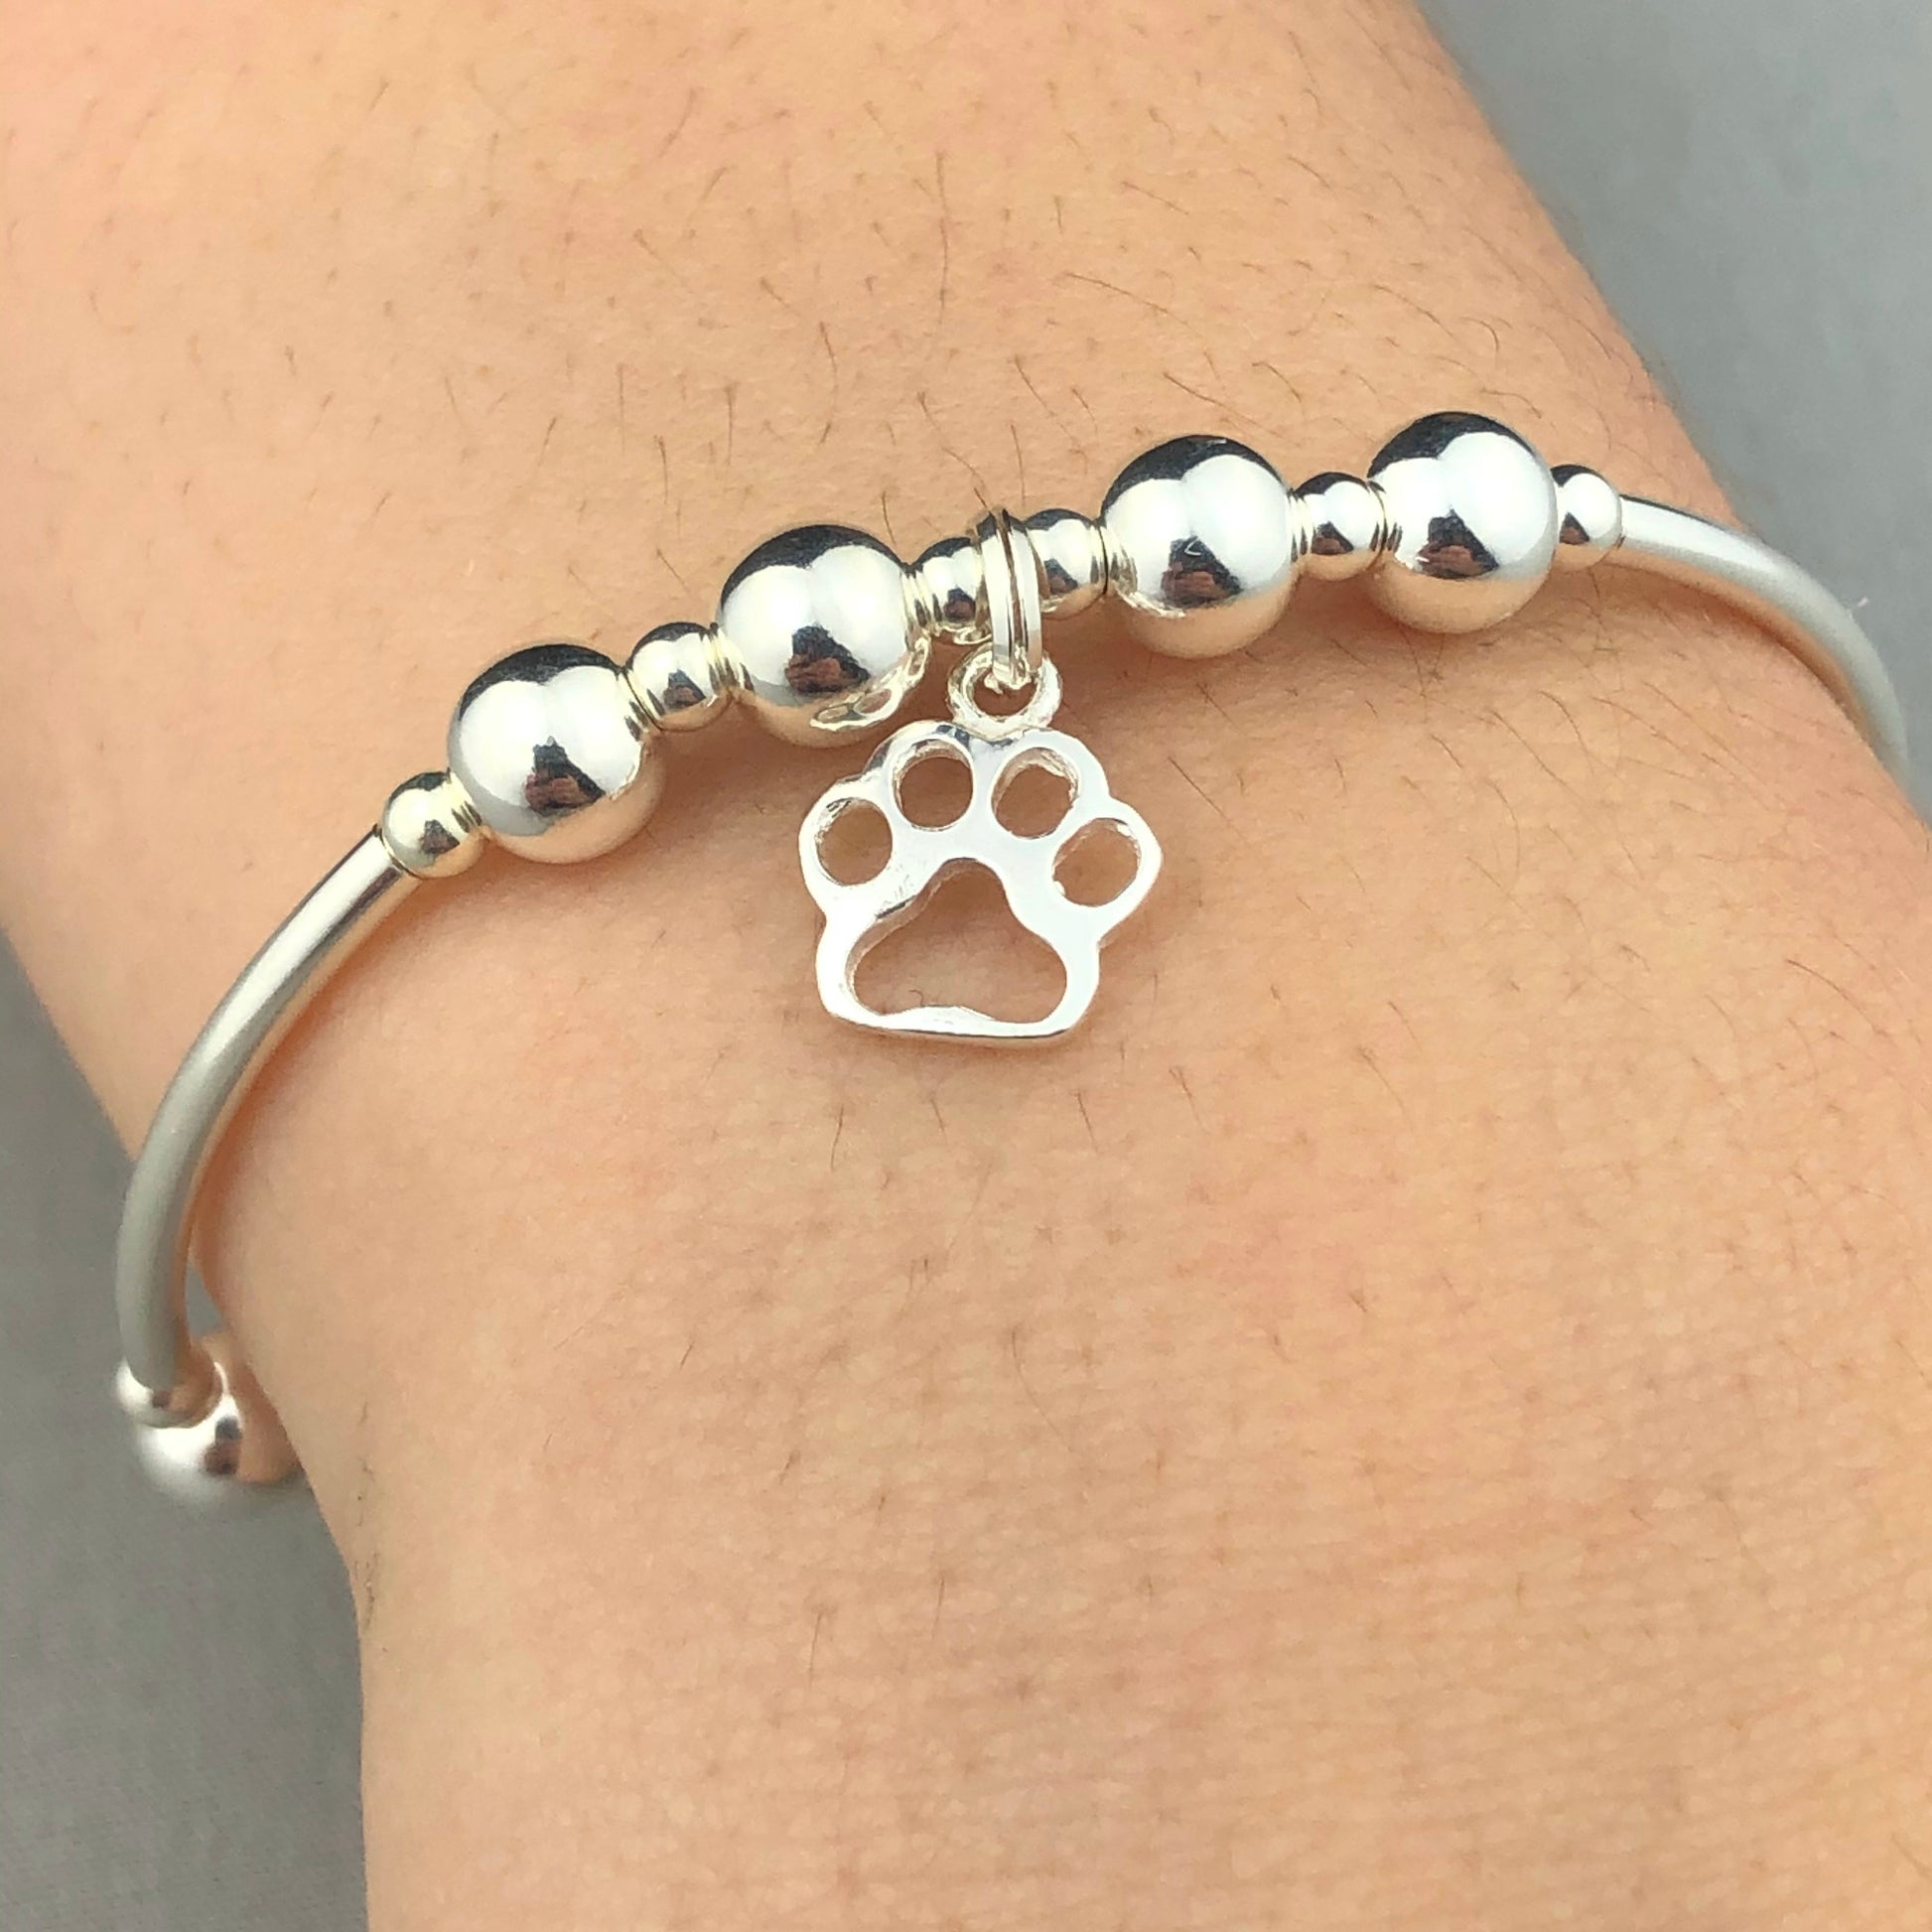 Cat Paw Charm Sterling Silver Stacking Bracelet for Her by My Silver Wish